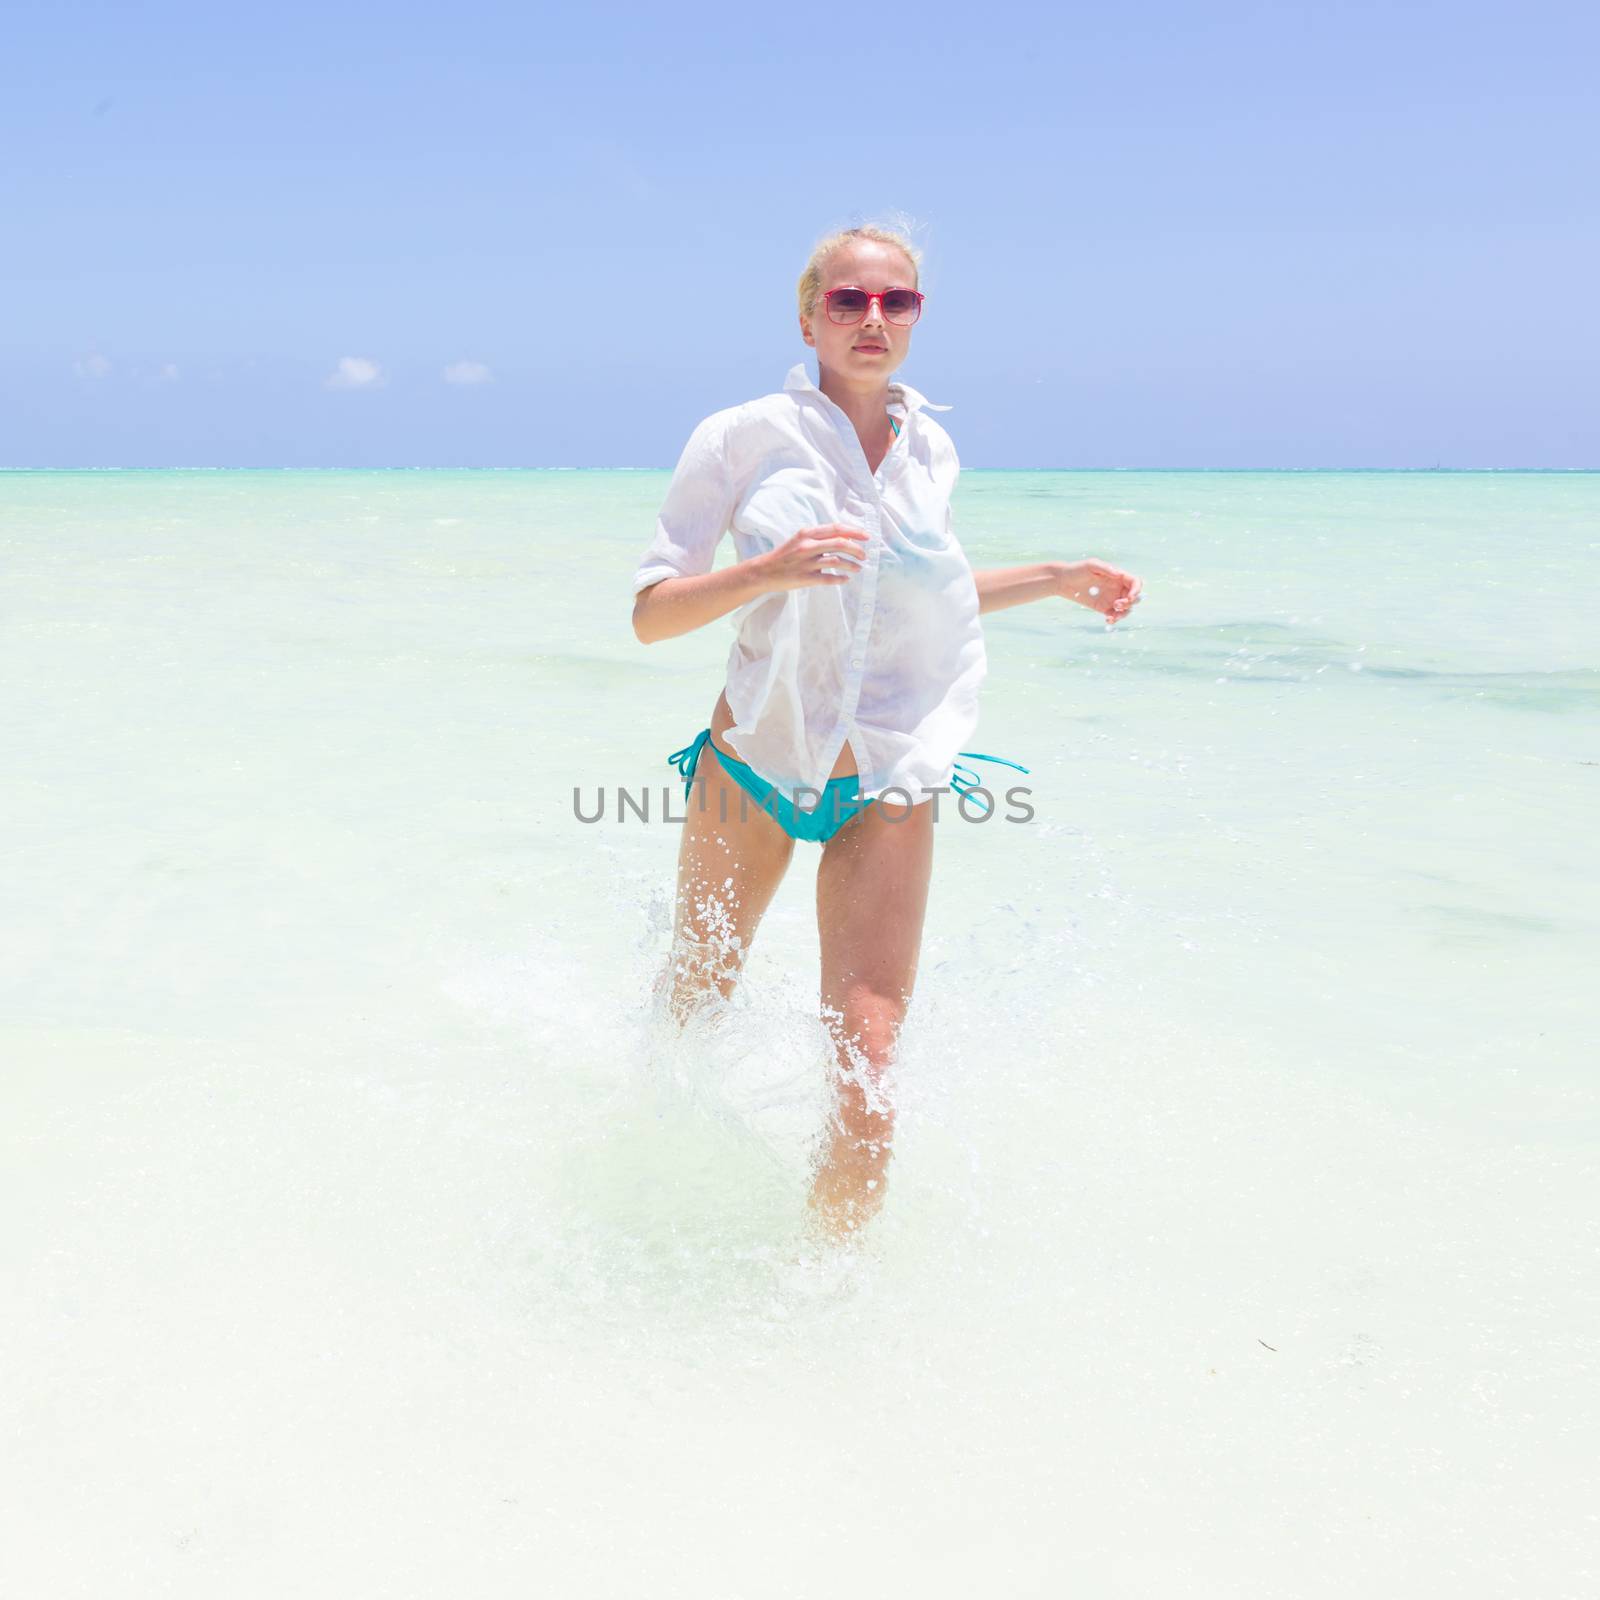 Young slim fit woman wearing white beach tunic running in sea water making water splashes with her legs. Vacation concept. Summer mood. Tropical beach setting. Paje, Zanzibar, Tanzania.